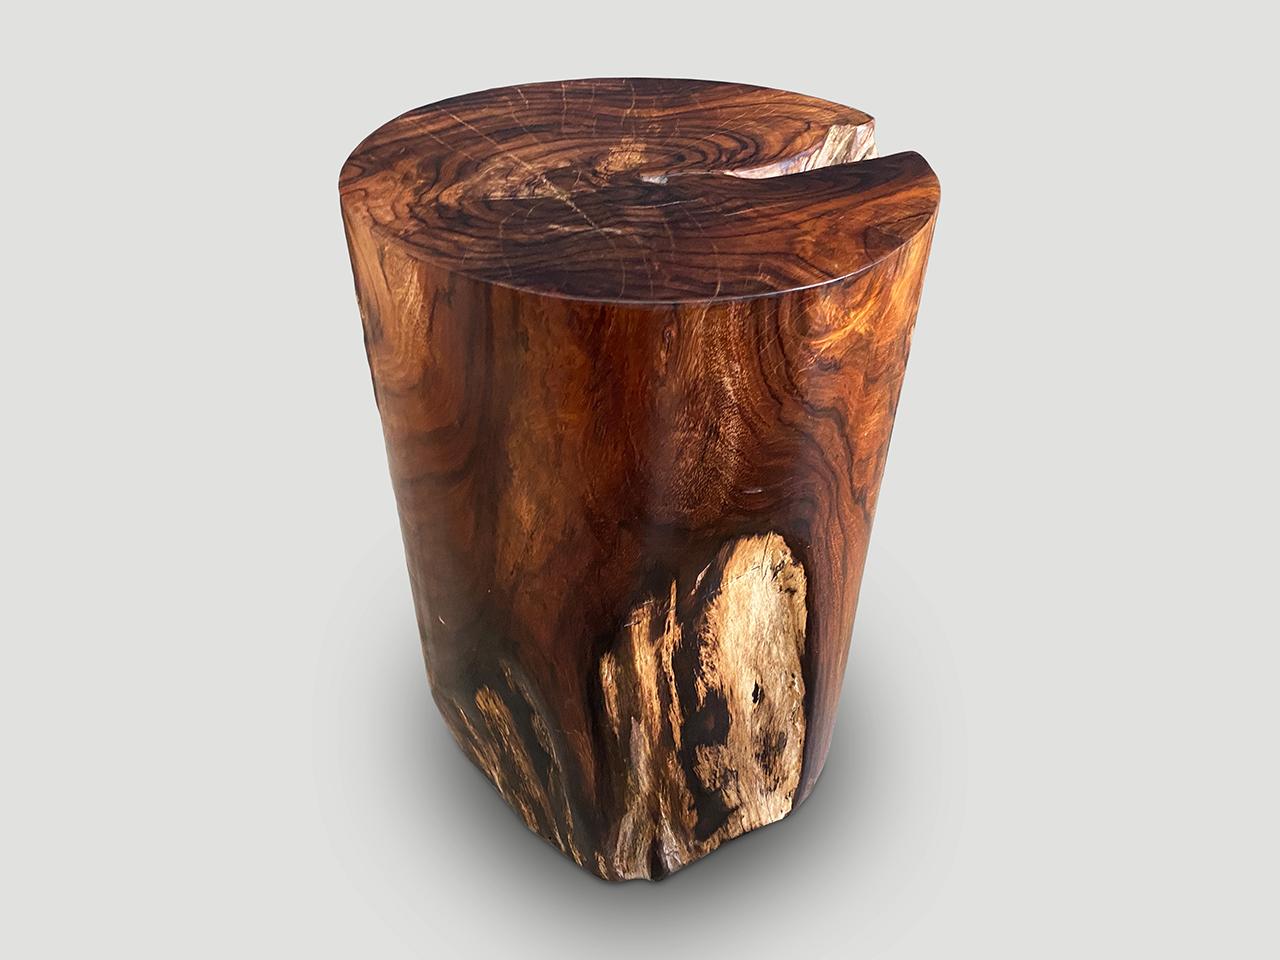 Exquisite rosewood side table with stunning contrasting tones. Finished with a natural oil revealing the beautiful wood grain. We have a collection. The price and images reflect the one shown.

Own an Andrianna Shamaris original.

Andrianna